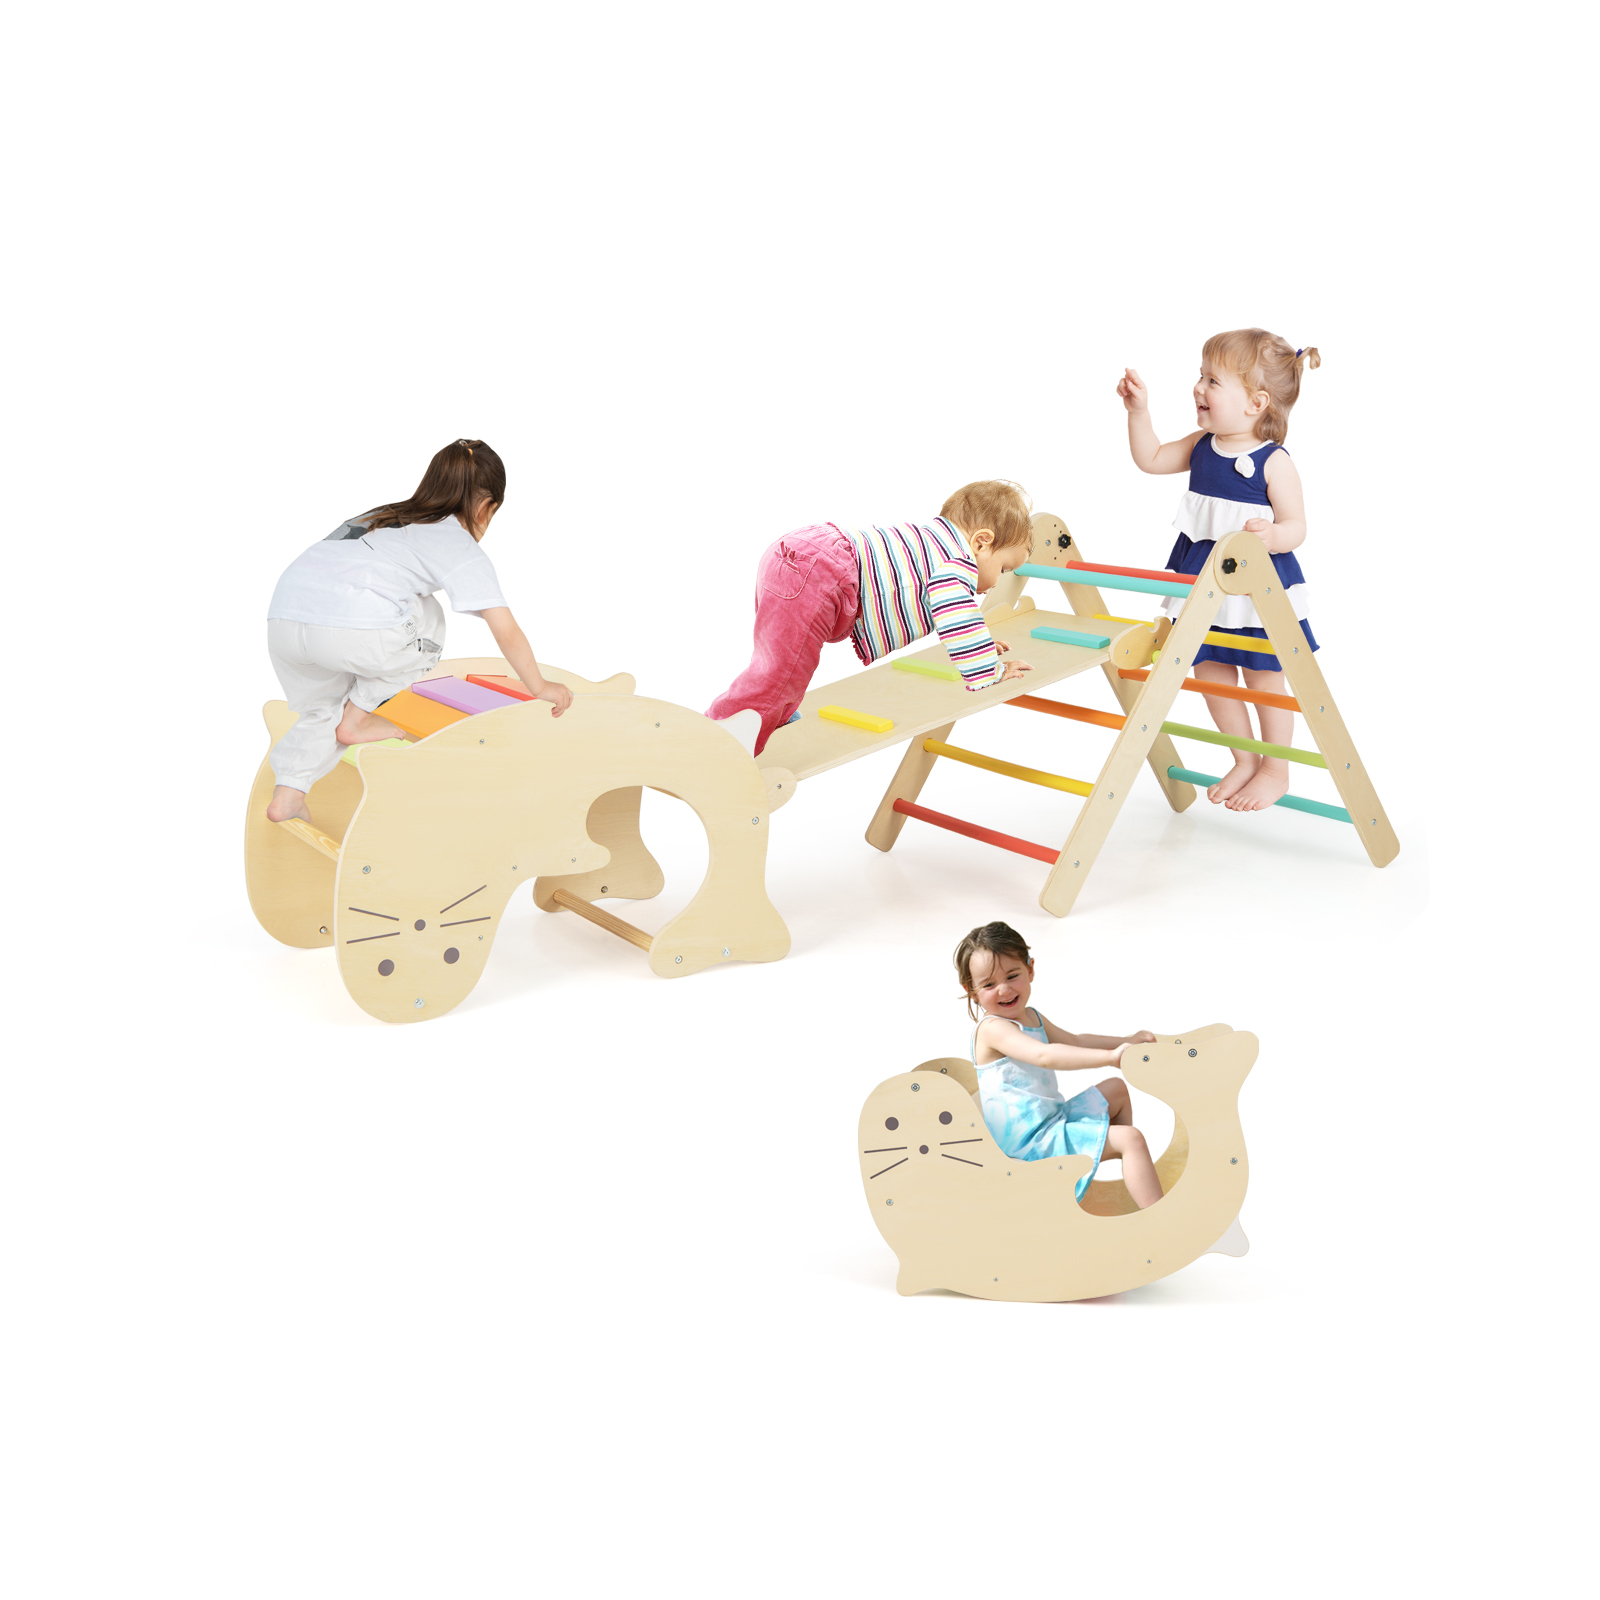 7-in-1 Indoor Wooden Foldable Climbing Toys for Toddlers-Multicolor